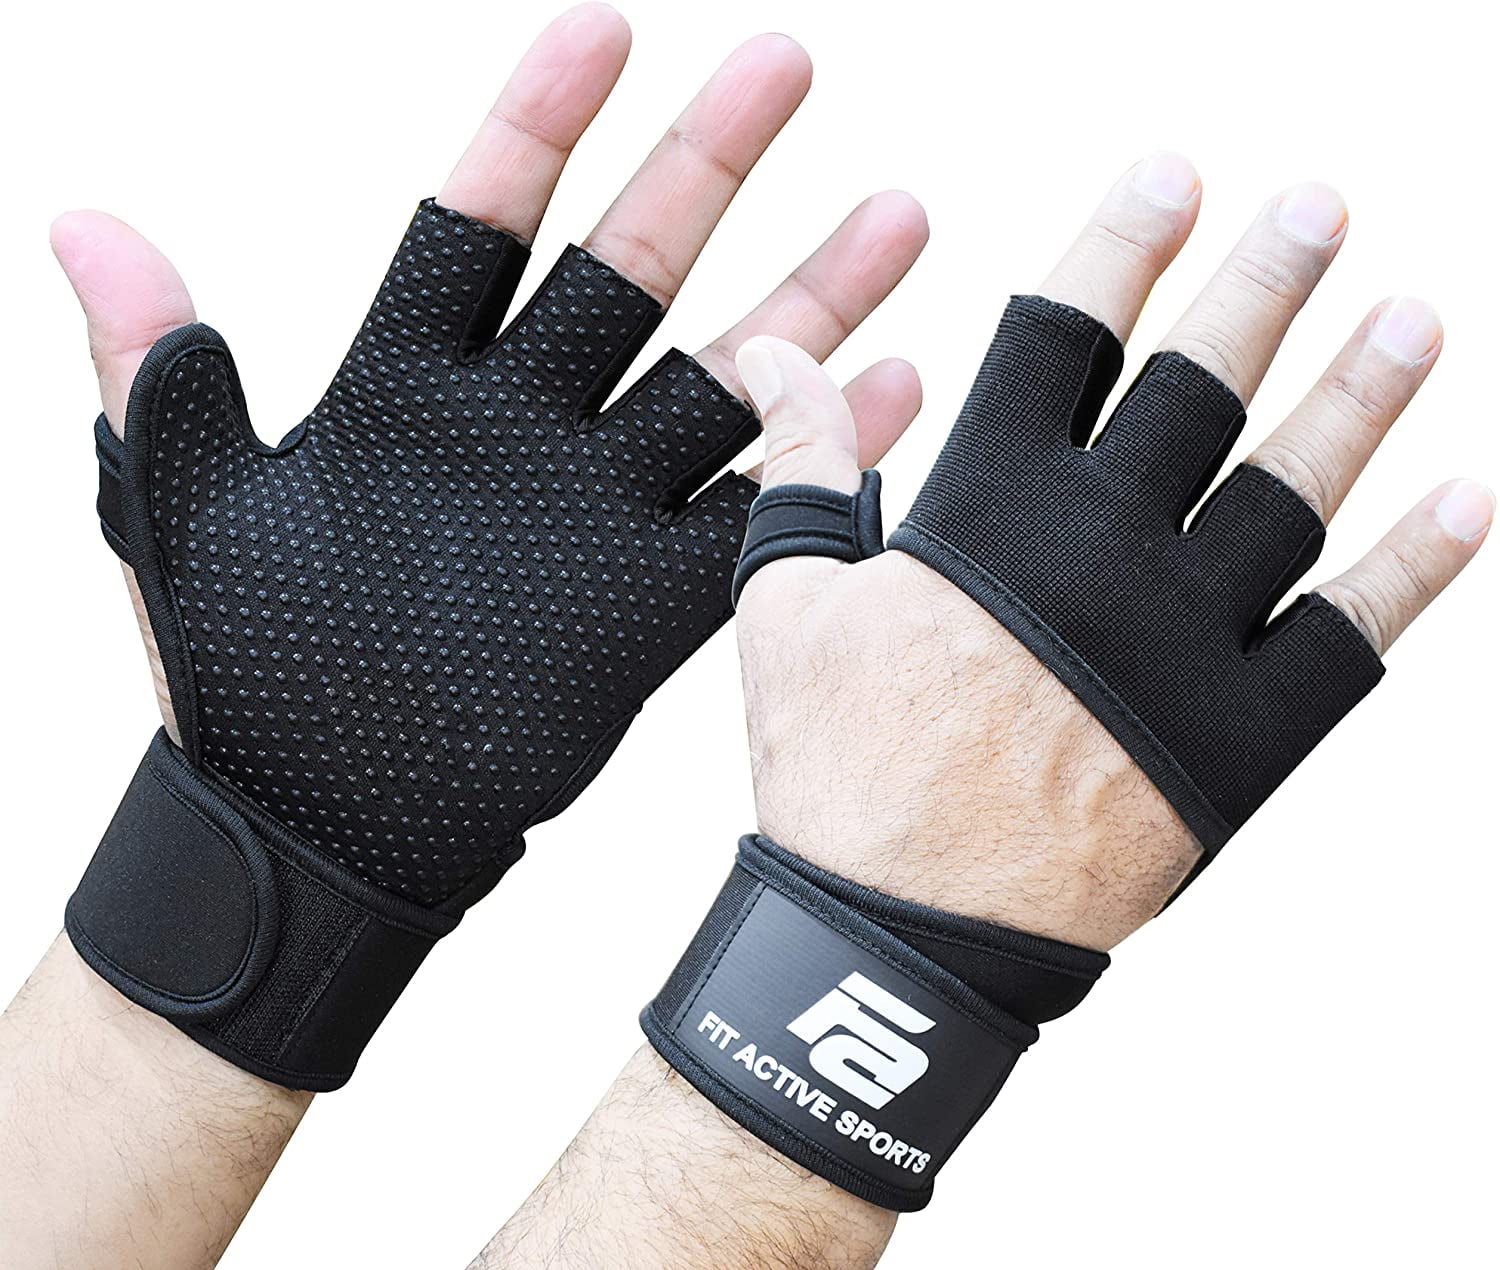 Power Weight Lifting Training Gym Straps Wrist Support Lift Gloves FAST SHIP!